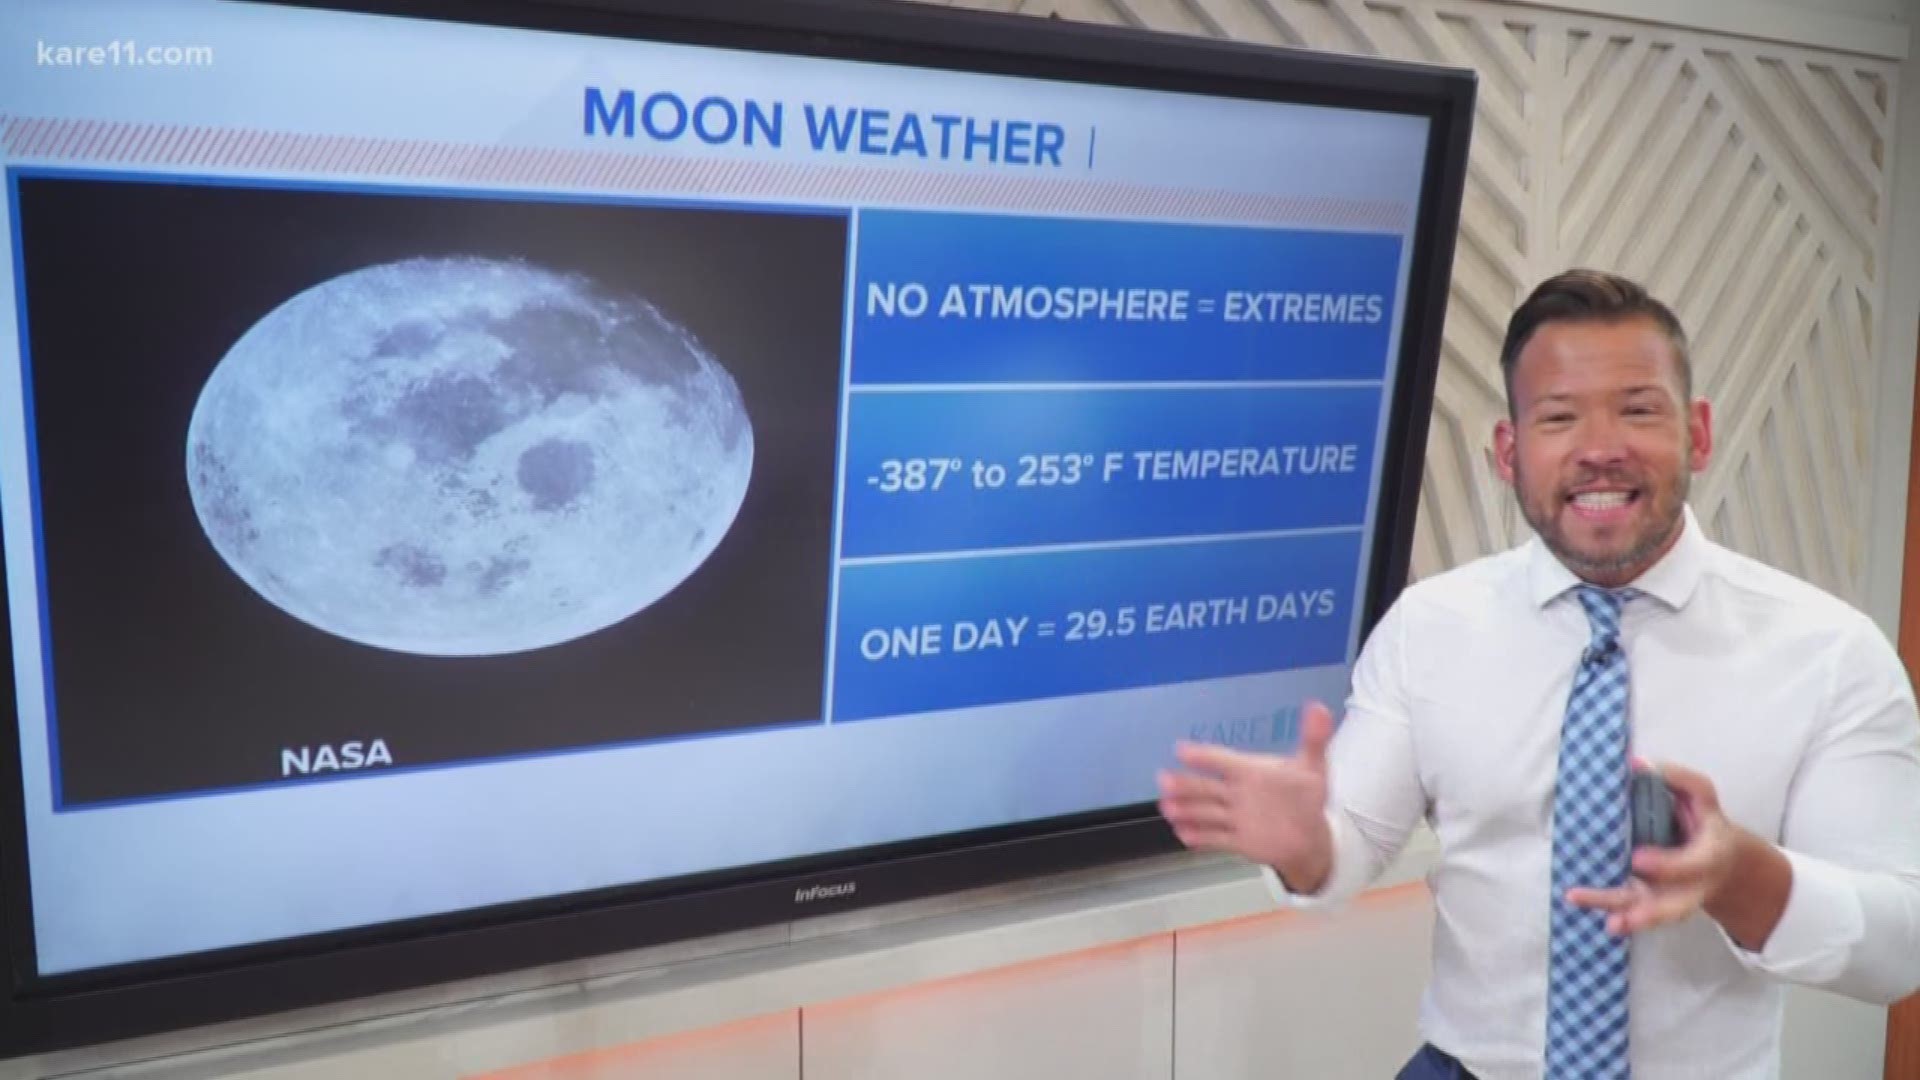 Minnesota has major swings in temperatures, but our hot-cold cycles are nothing when compared to weather on the Moon. Sven explains.